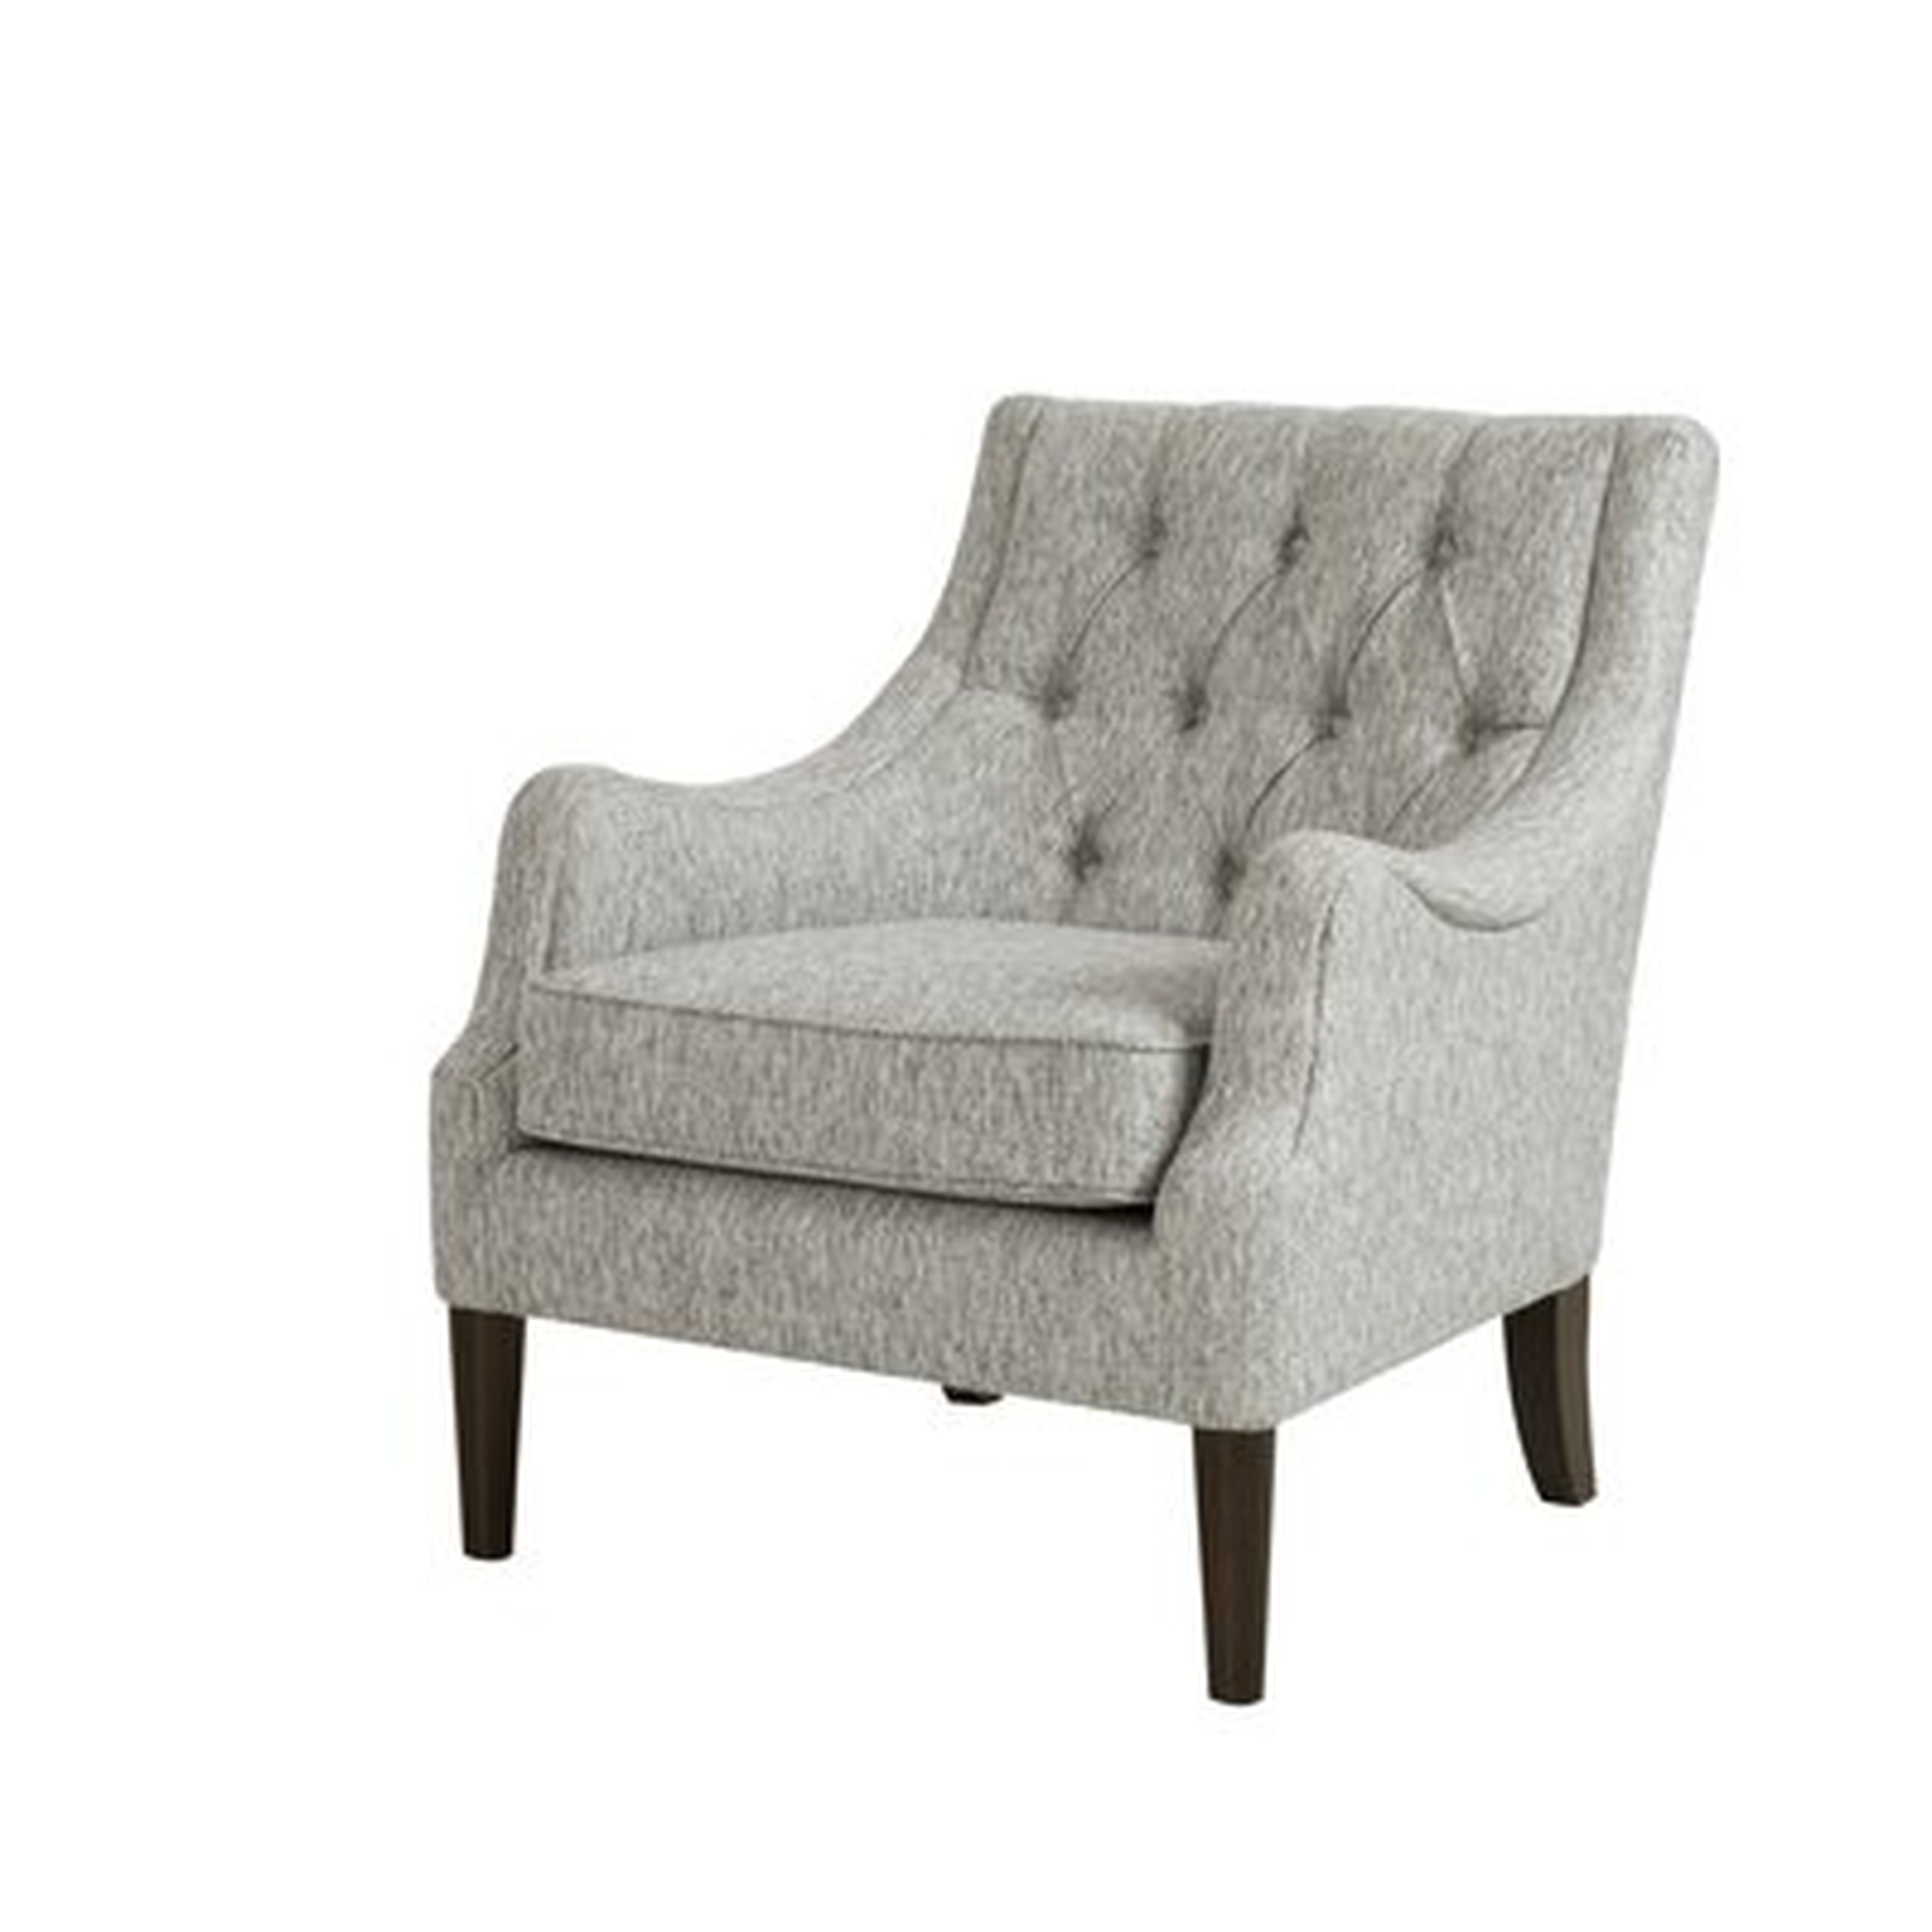 Galesville 29.25" Wide Tufted Polyester Wingback Chair, Gray - Wayfair